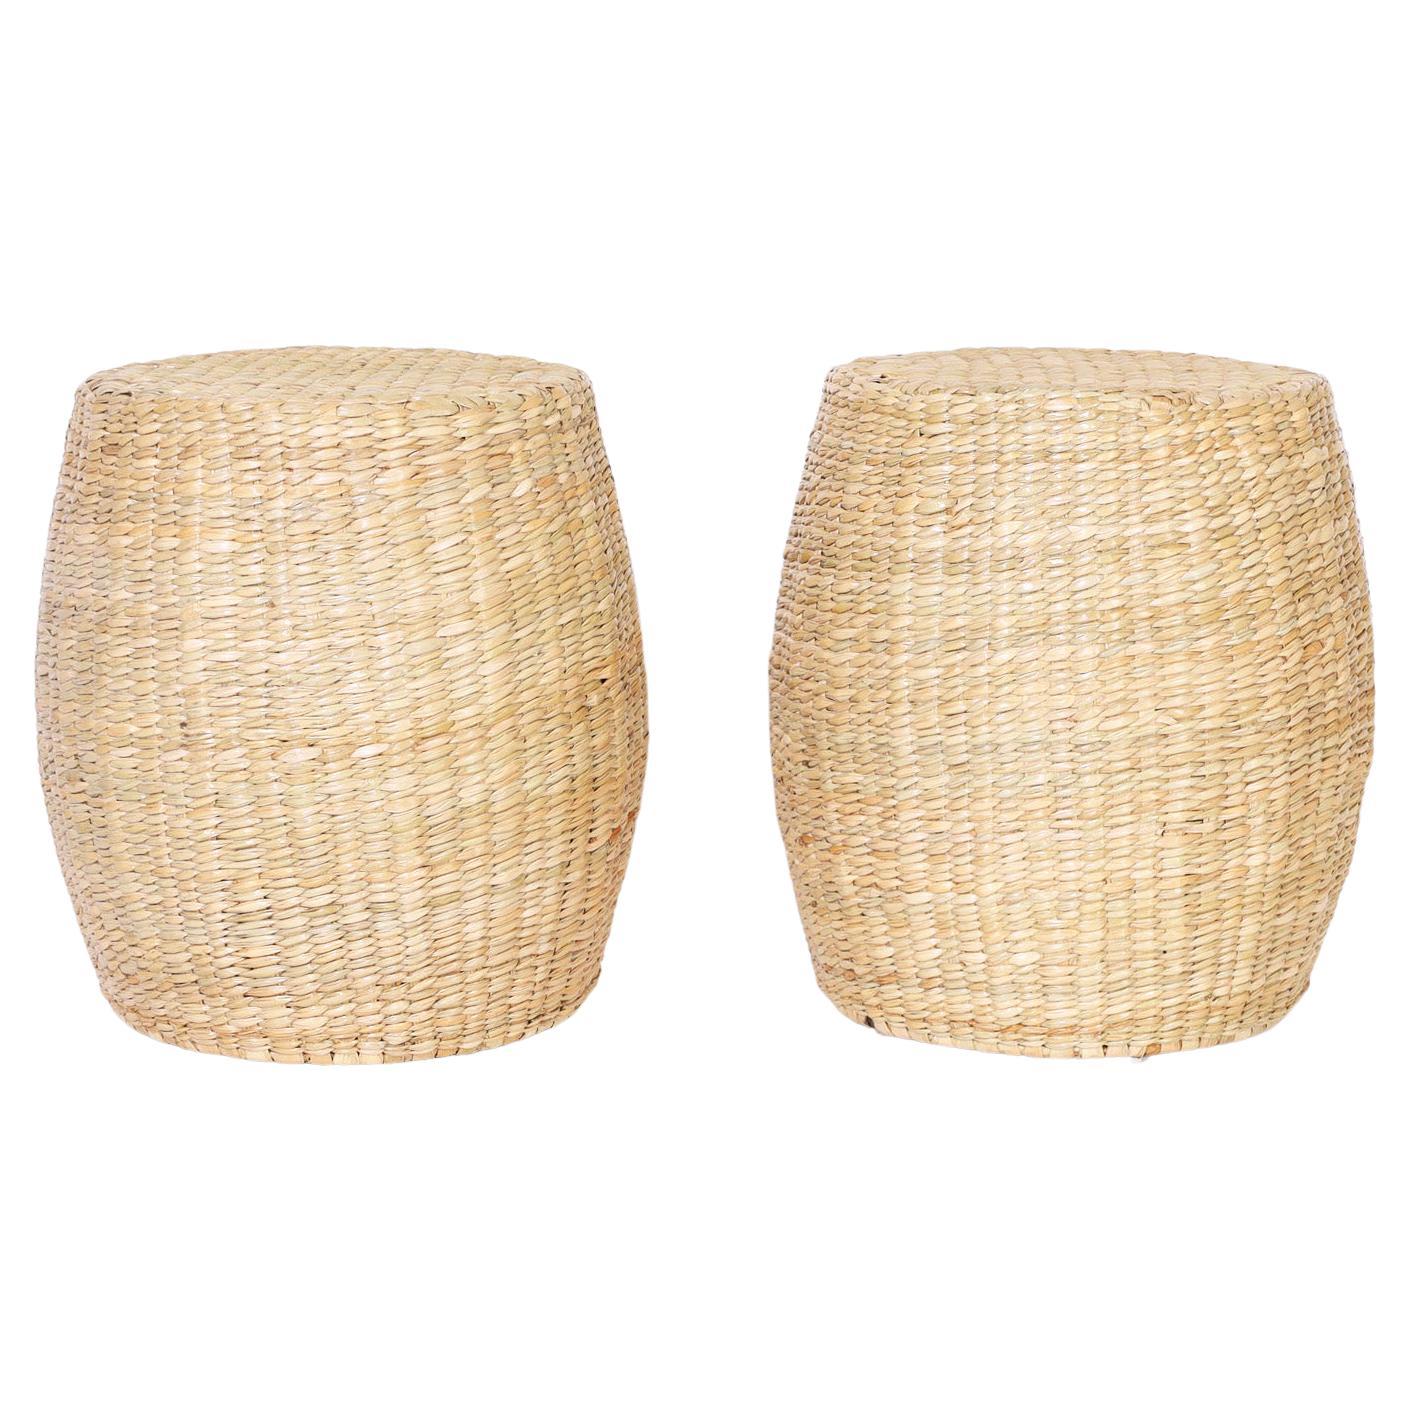 Pair of Wicker Chuspata Garden Seats from the FS Flores Collection